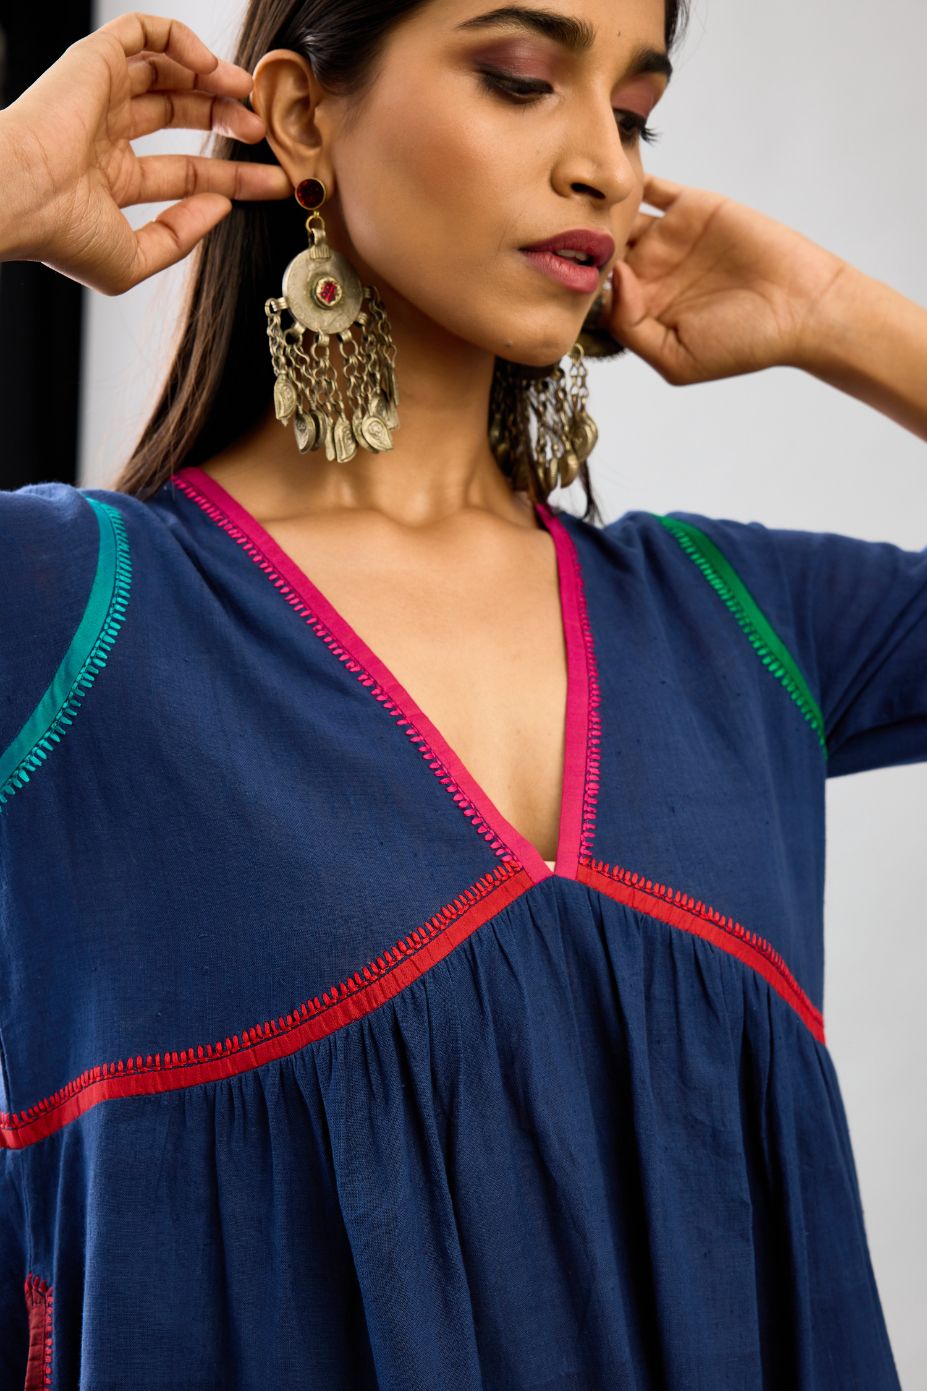 Blue Handloom Cotton kurta set dress with multi colored silk facing and embroidery details.